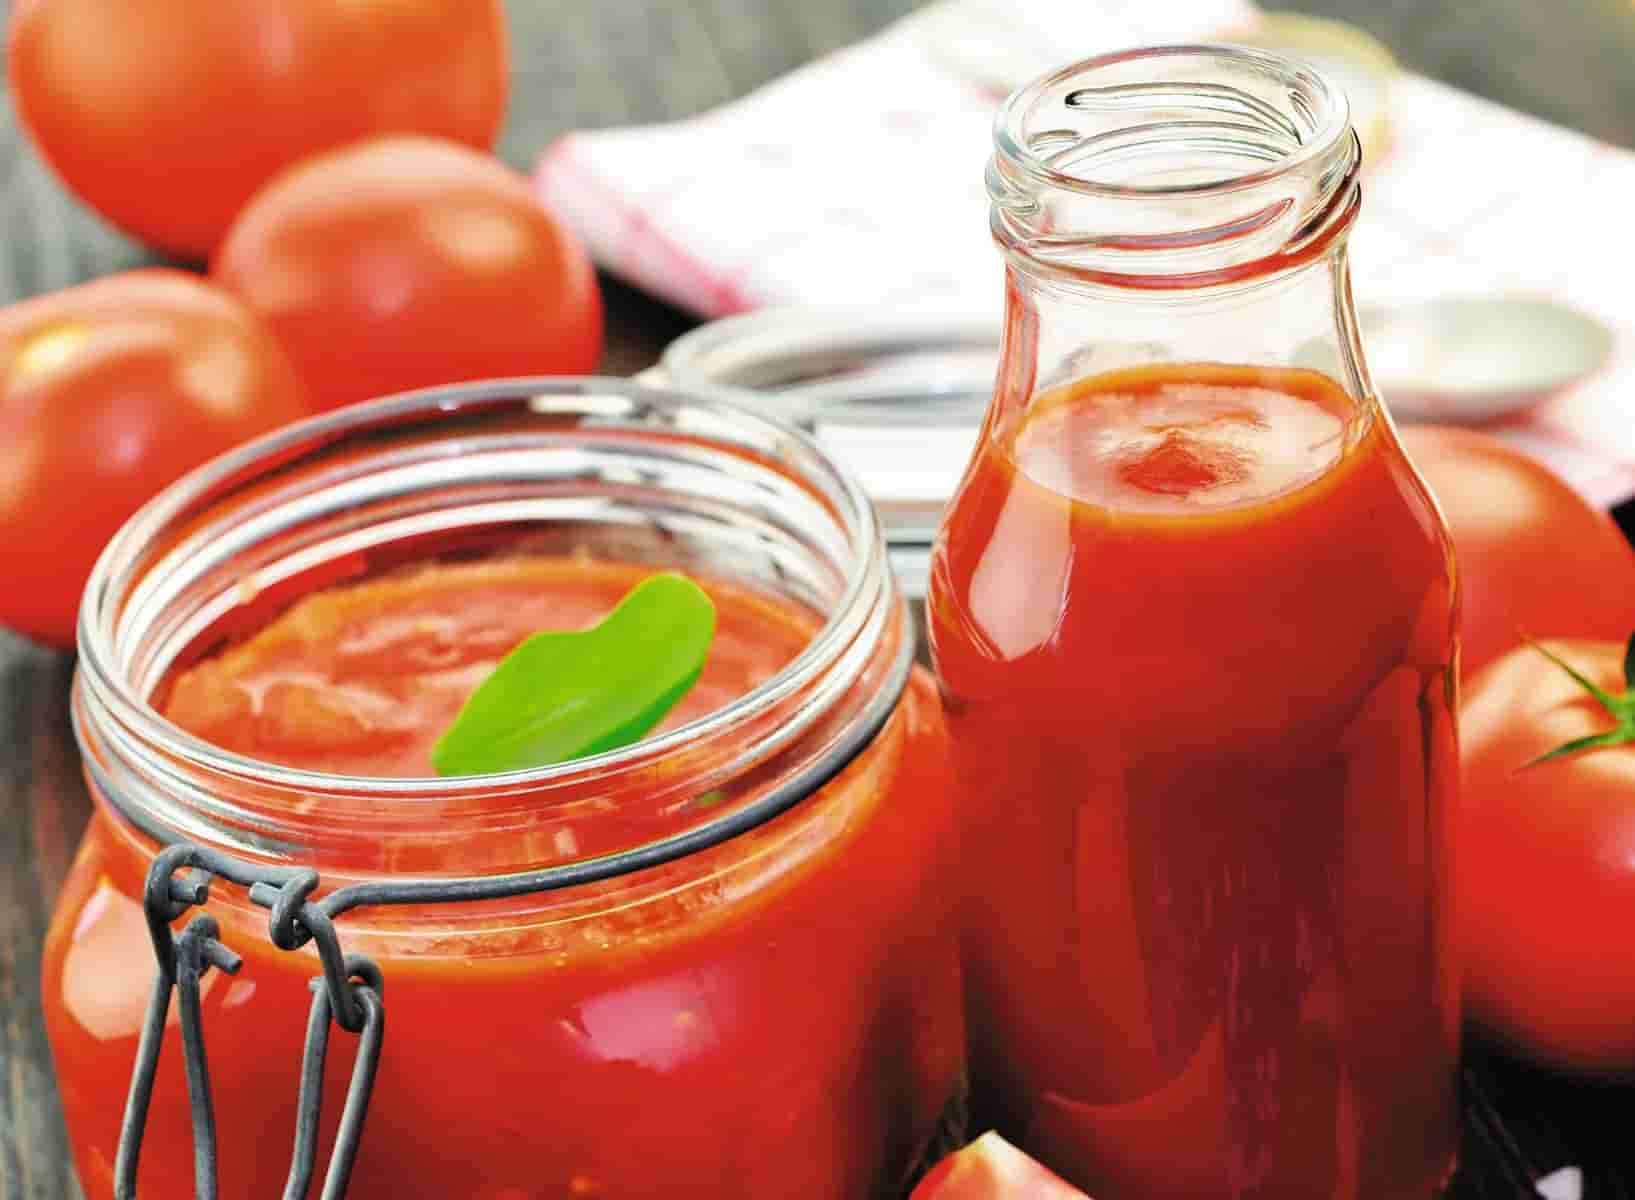 what is Tomato sauce bottle?